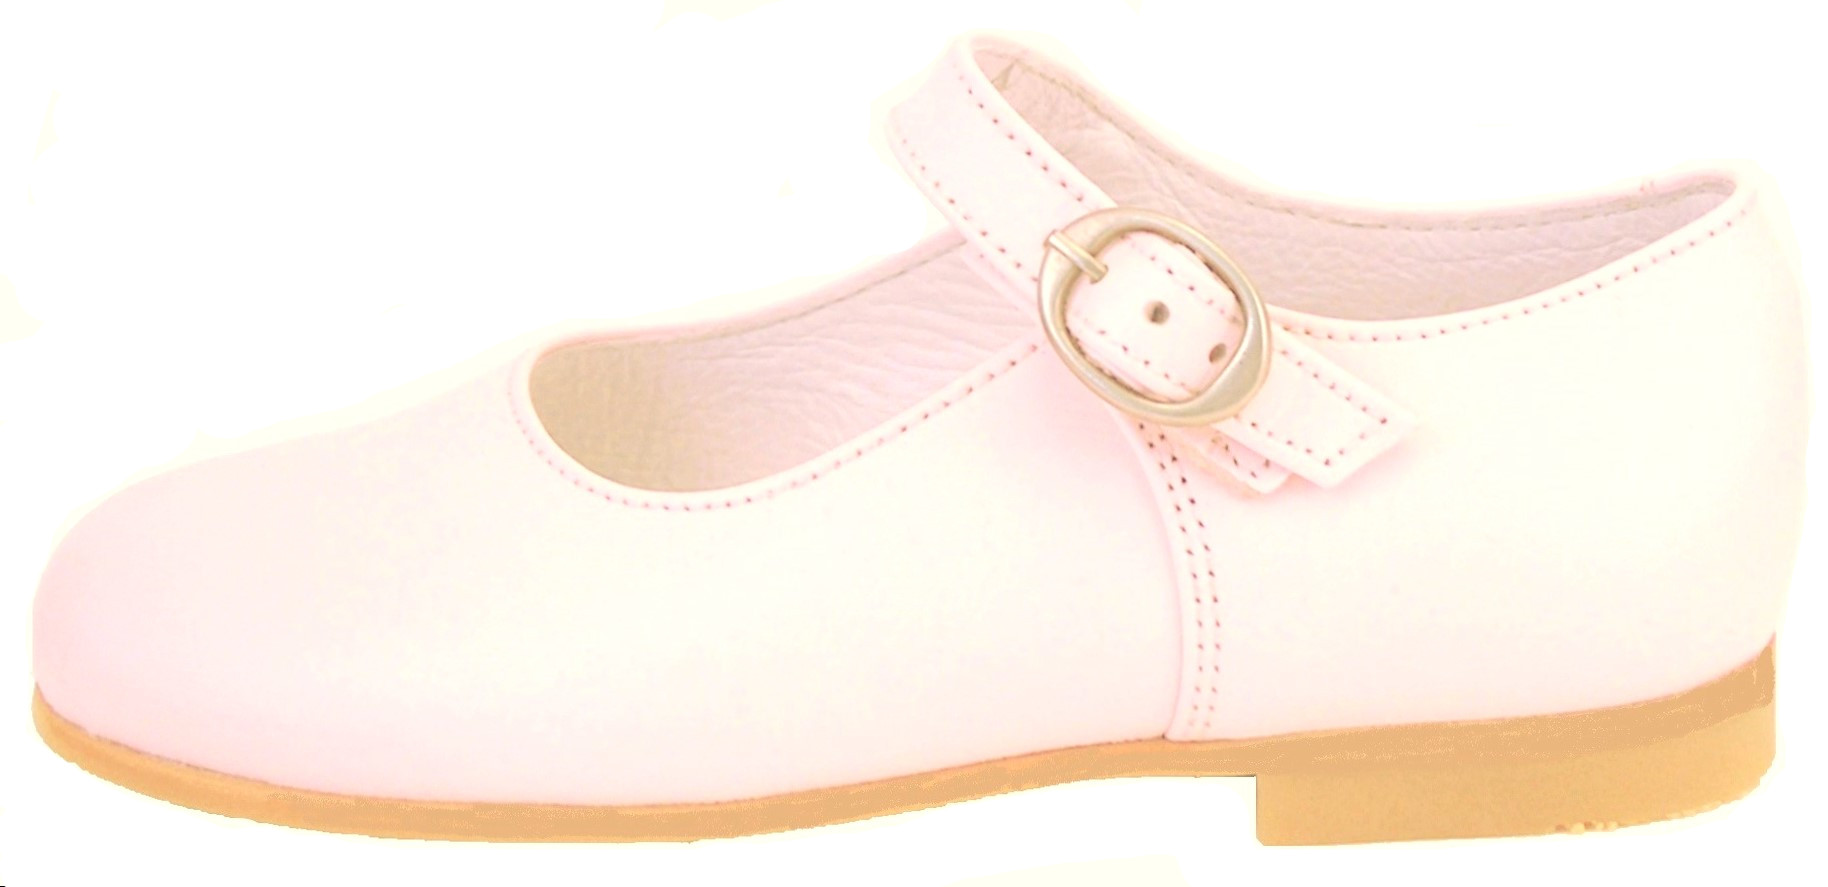 FARO F-4277 - Pink Pearlized Mary Janes